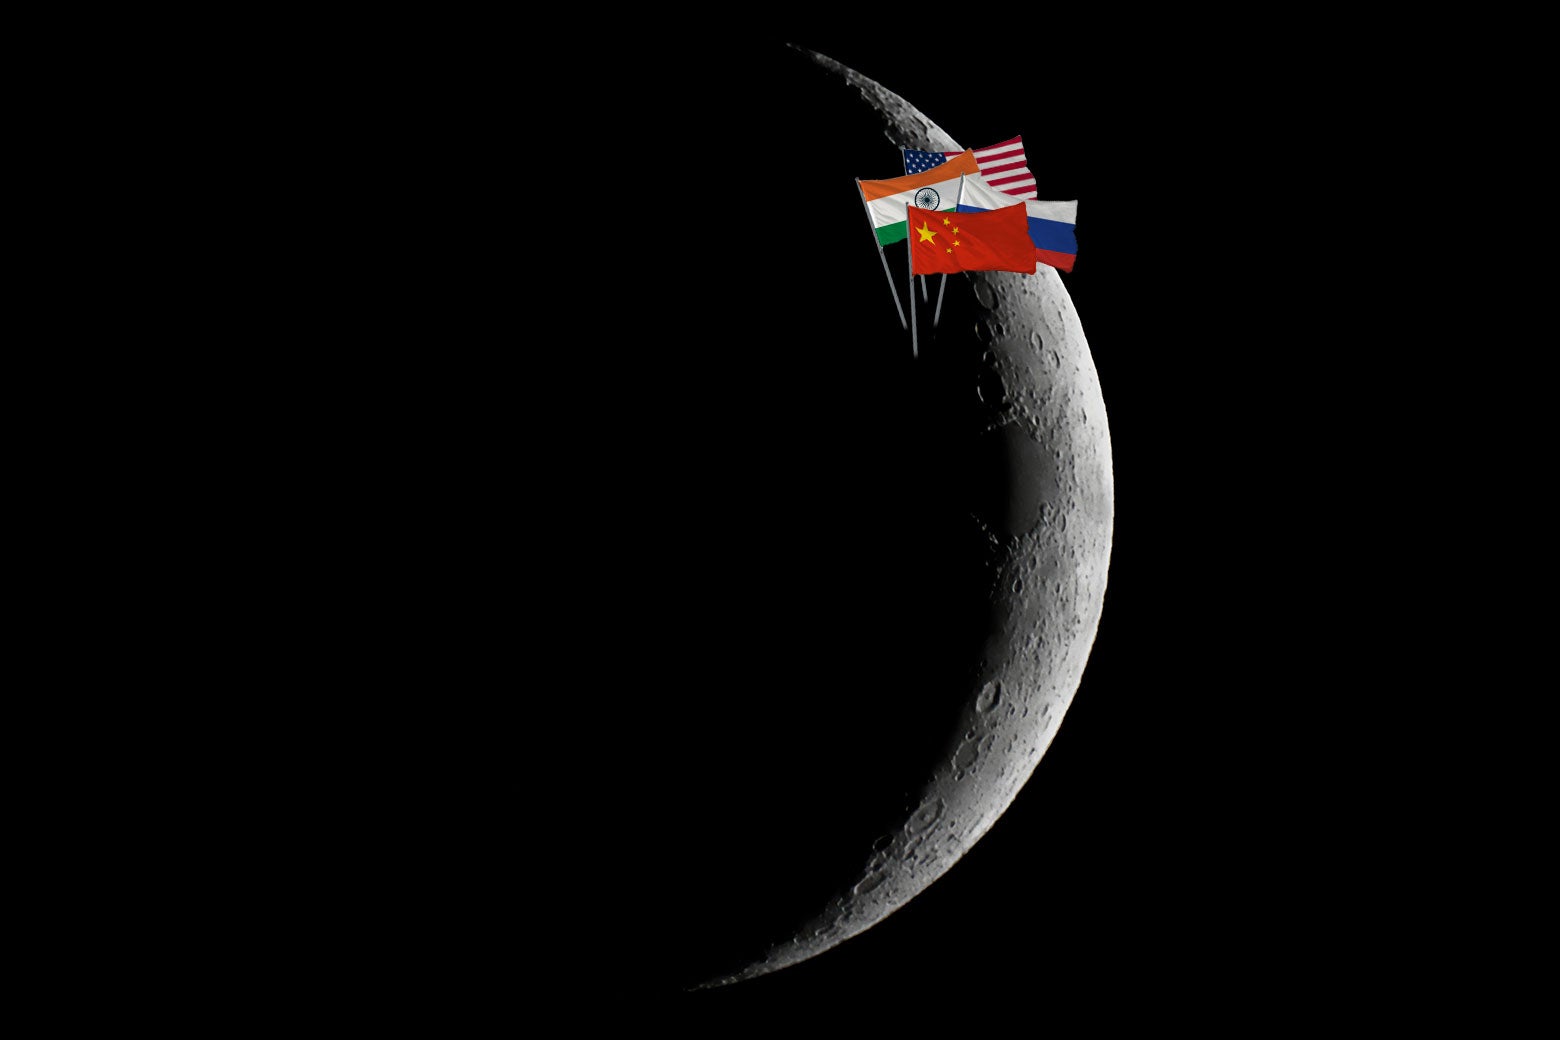 A shadowy side-shot of the moon, with the Russian, Chinese, Indian, and American flags grouped together on the moon's surface.